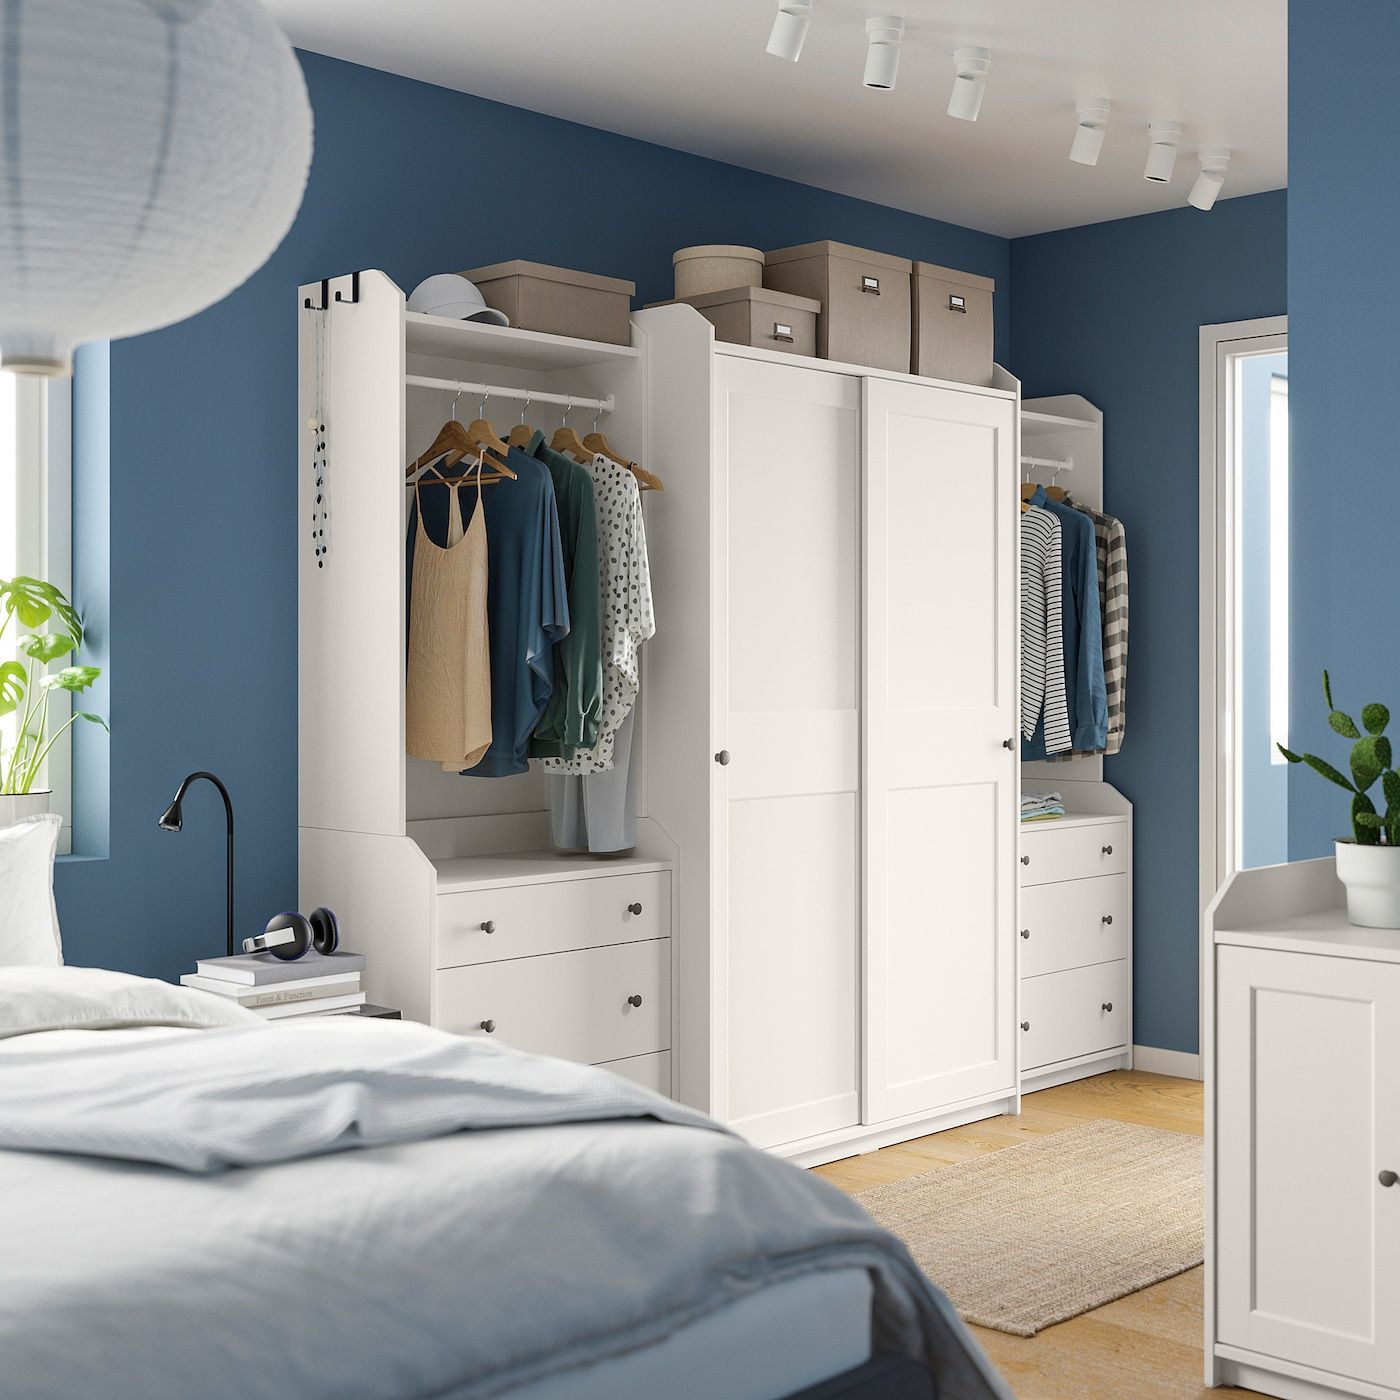 Hauga Wardrobe Combination, White, 1015/8x215/8x783/8" – Ikea With Wardrobes And Chest Of Drawers Combined (View 5 of 15)